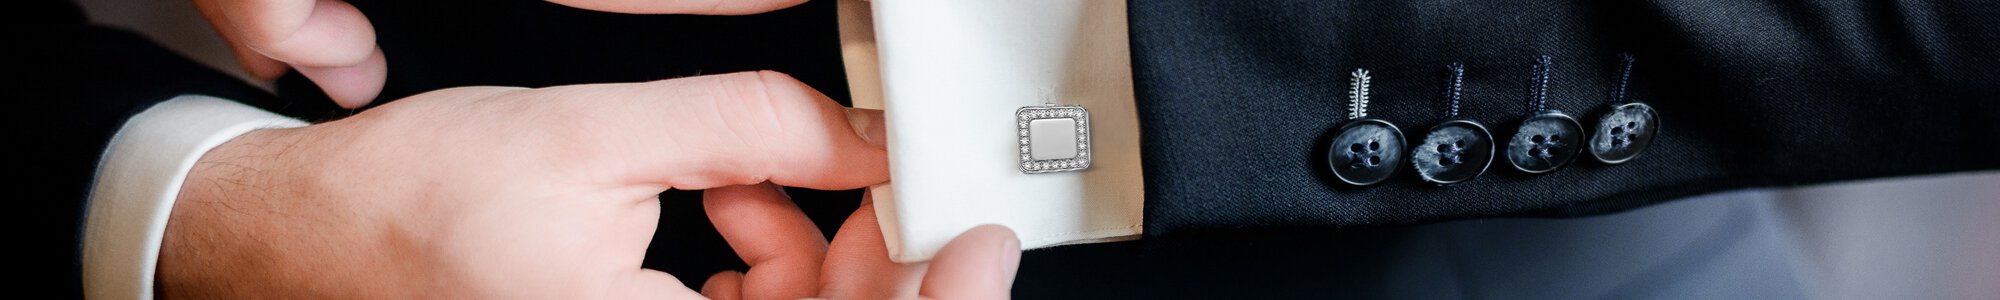 Cufflinks - Stunning personalised cufflinks with a special engraving